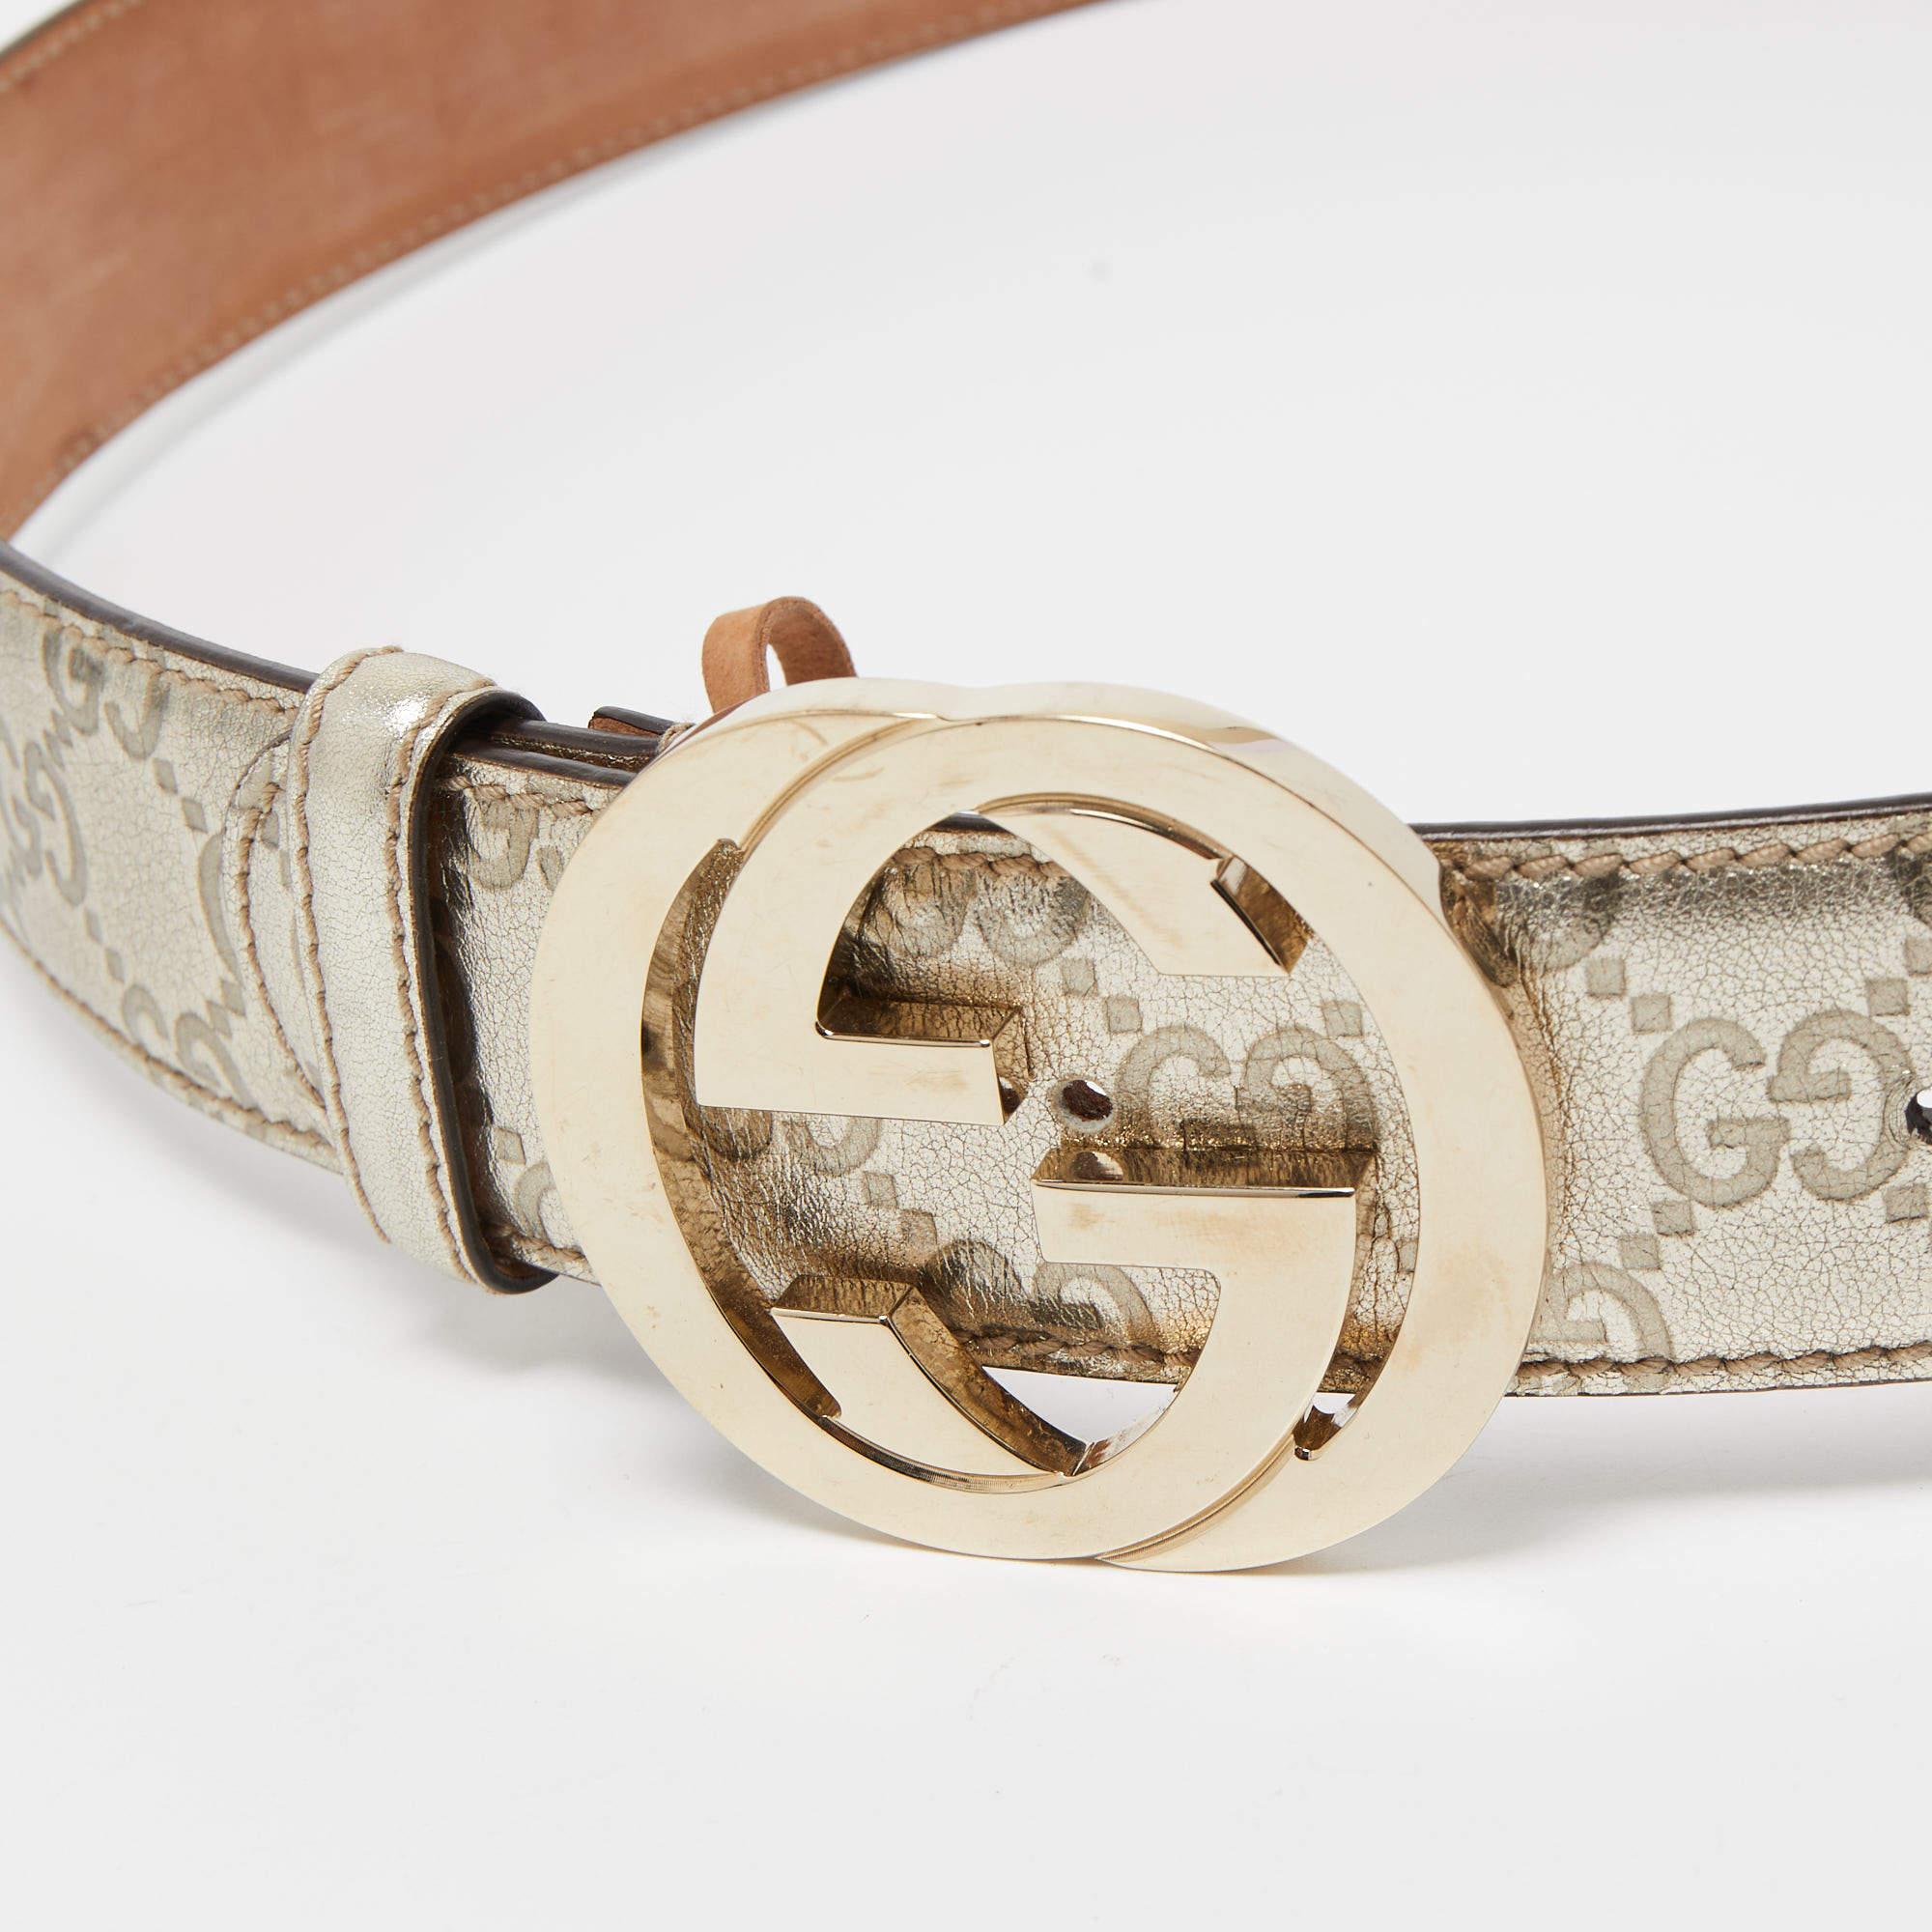 This belt from Gucci is a luxe accessory that will complement your outfit well. It is made from Guccissima leather and finished with a gold-toned logo buckle.

